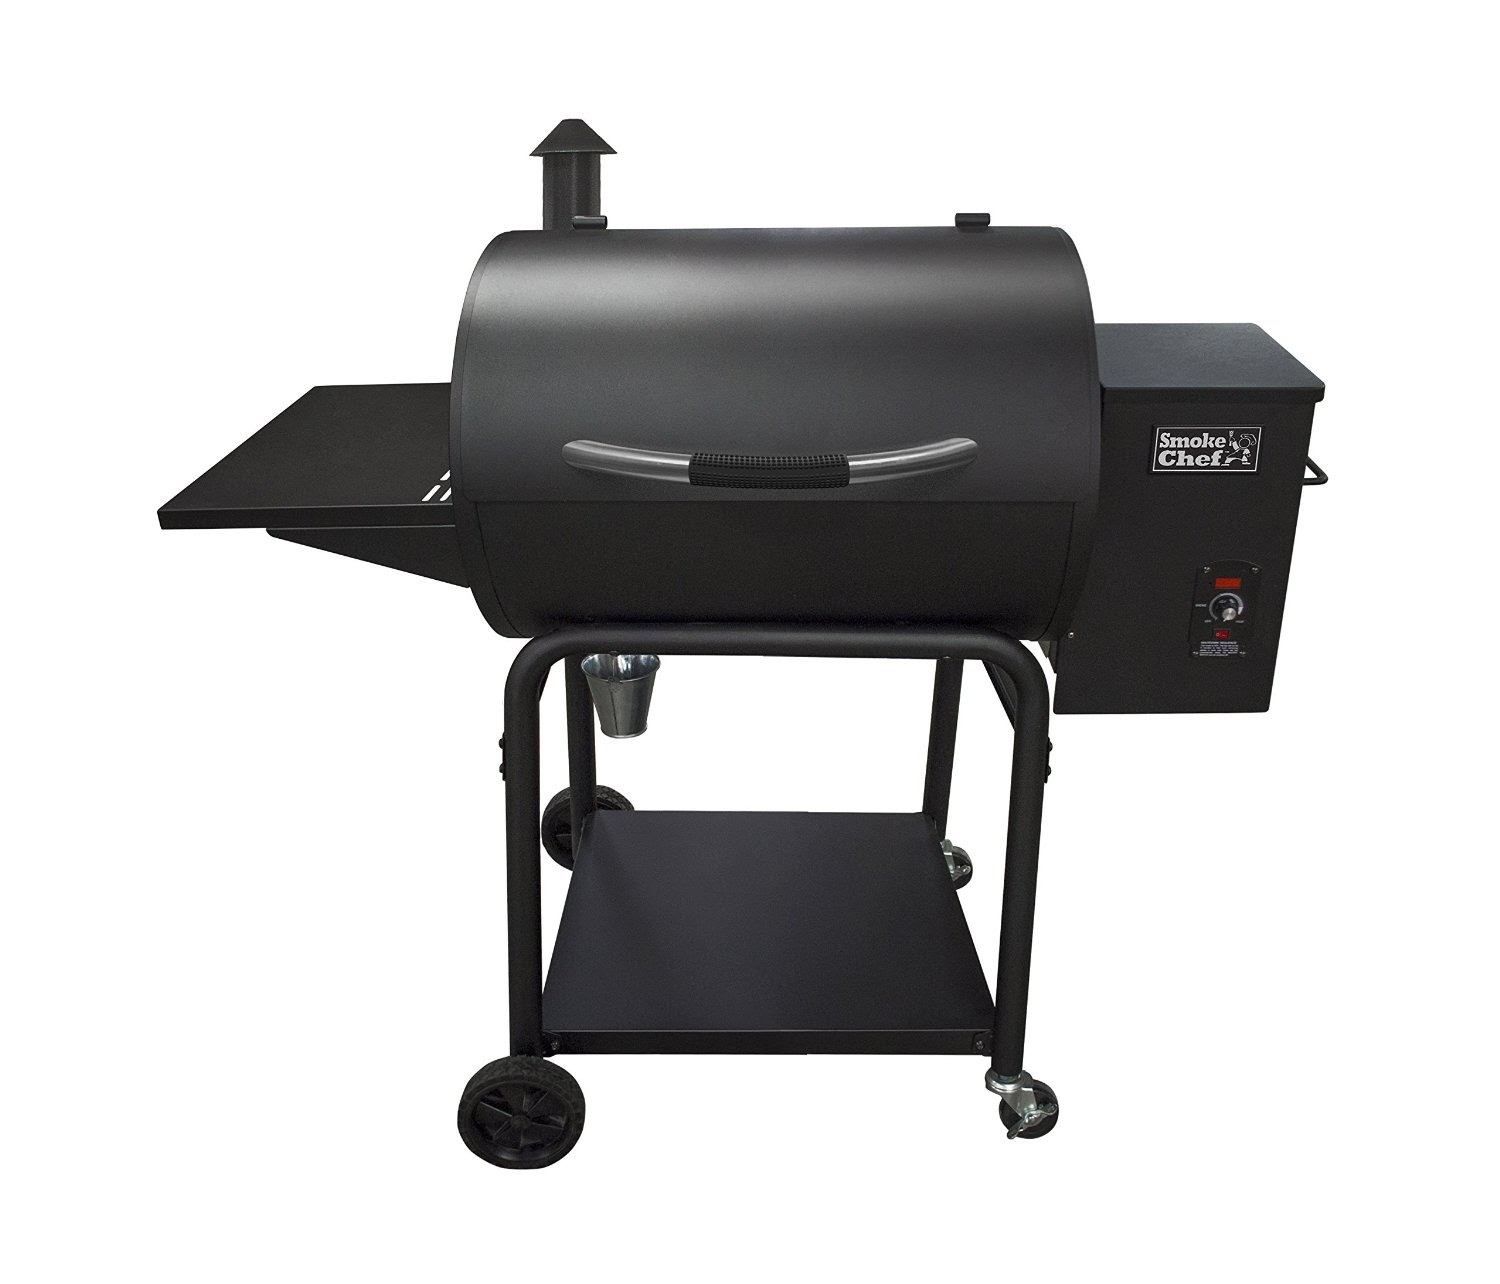 Home Garden More Smoke Hollow Ps2415 Pellet Smoker Grill 24 Review Buy Online